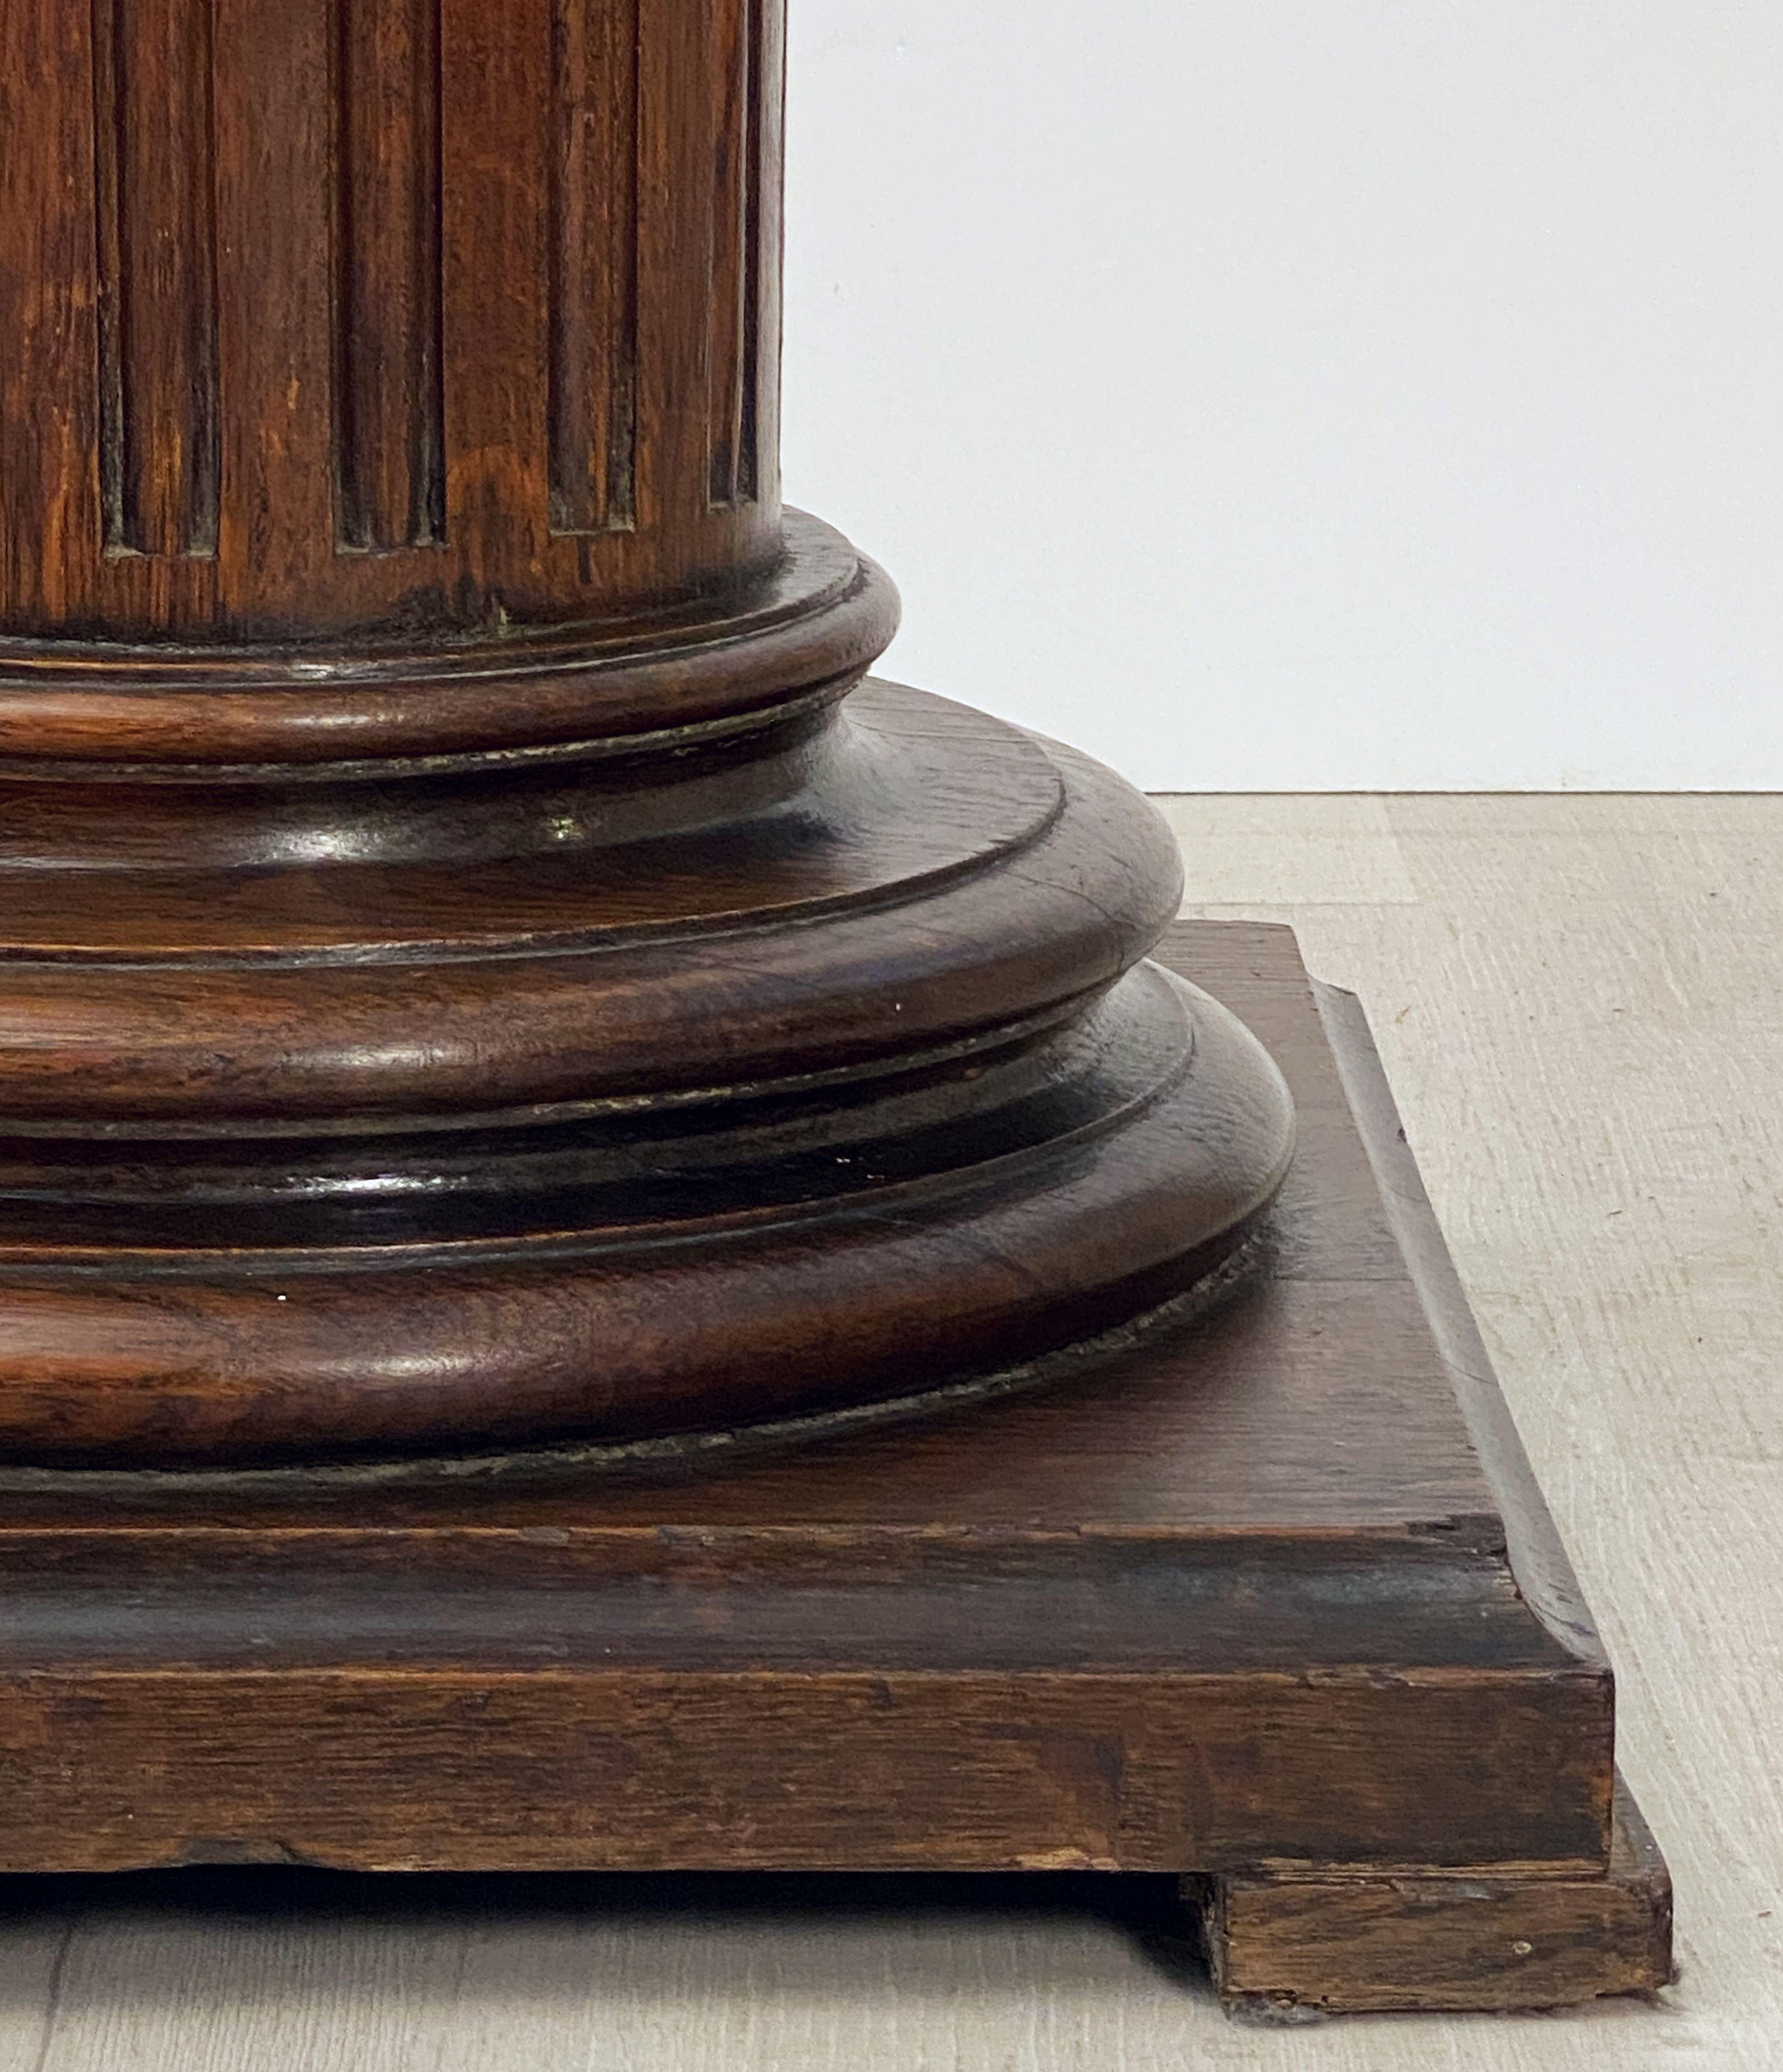 19th Century Tall Neoclassical Wooden Column Pedestal Stand or Plinth from France